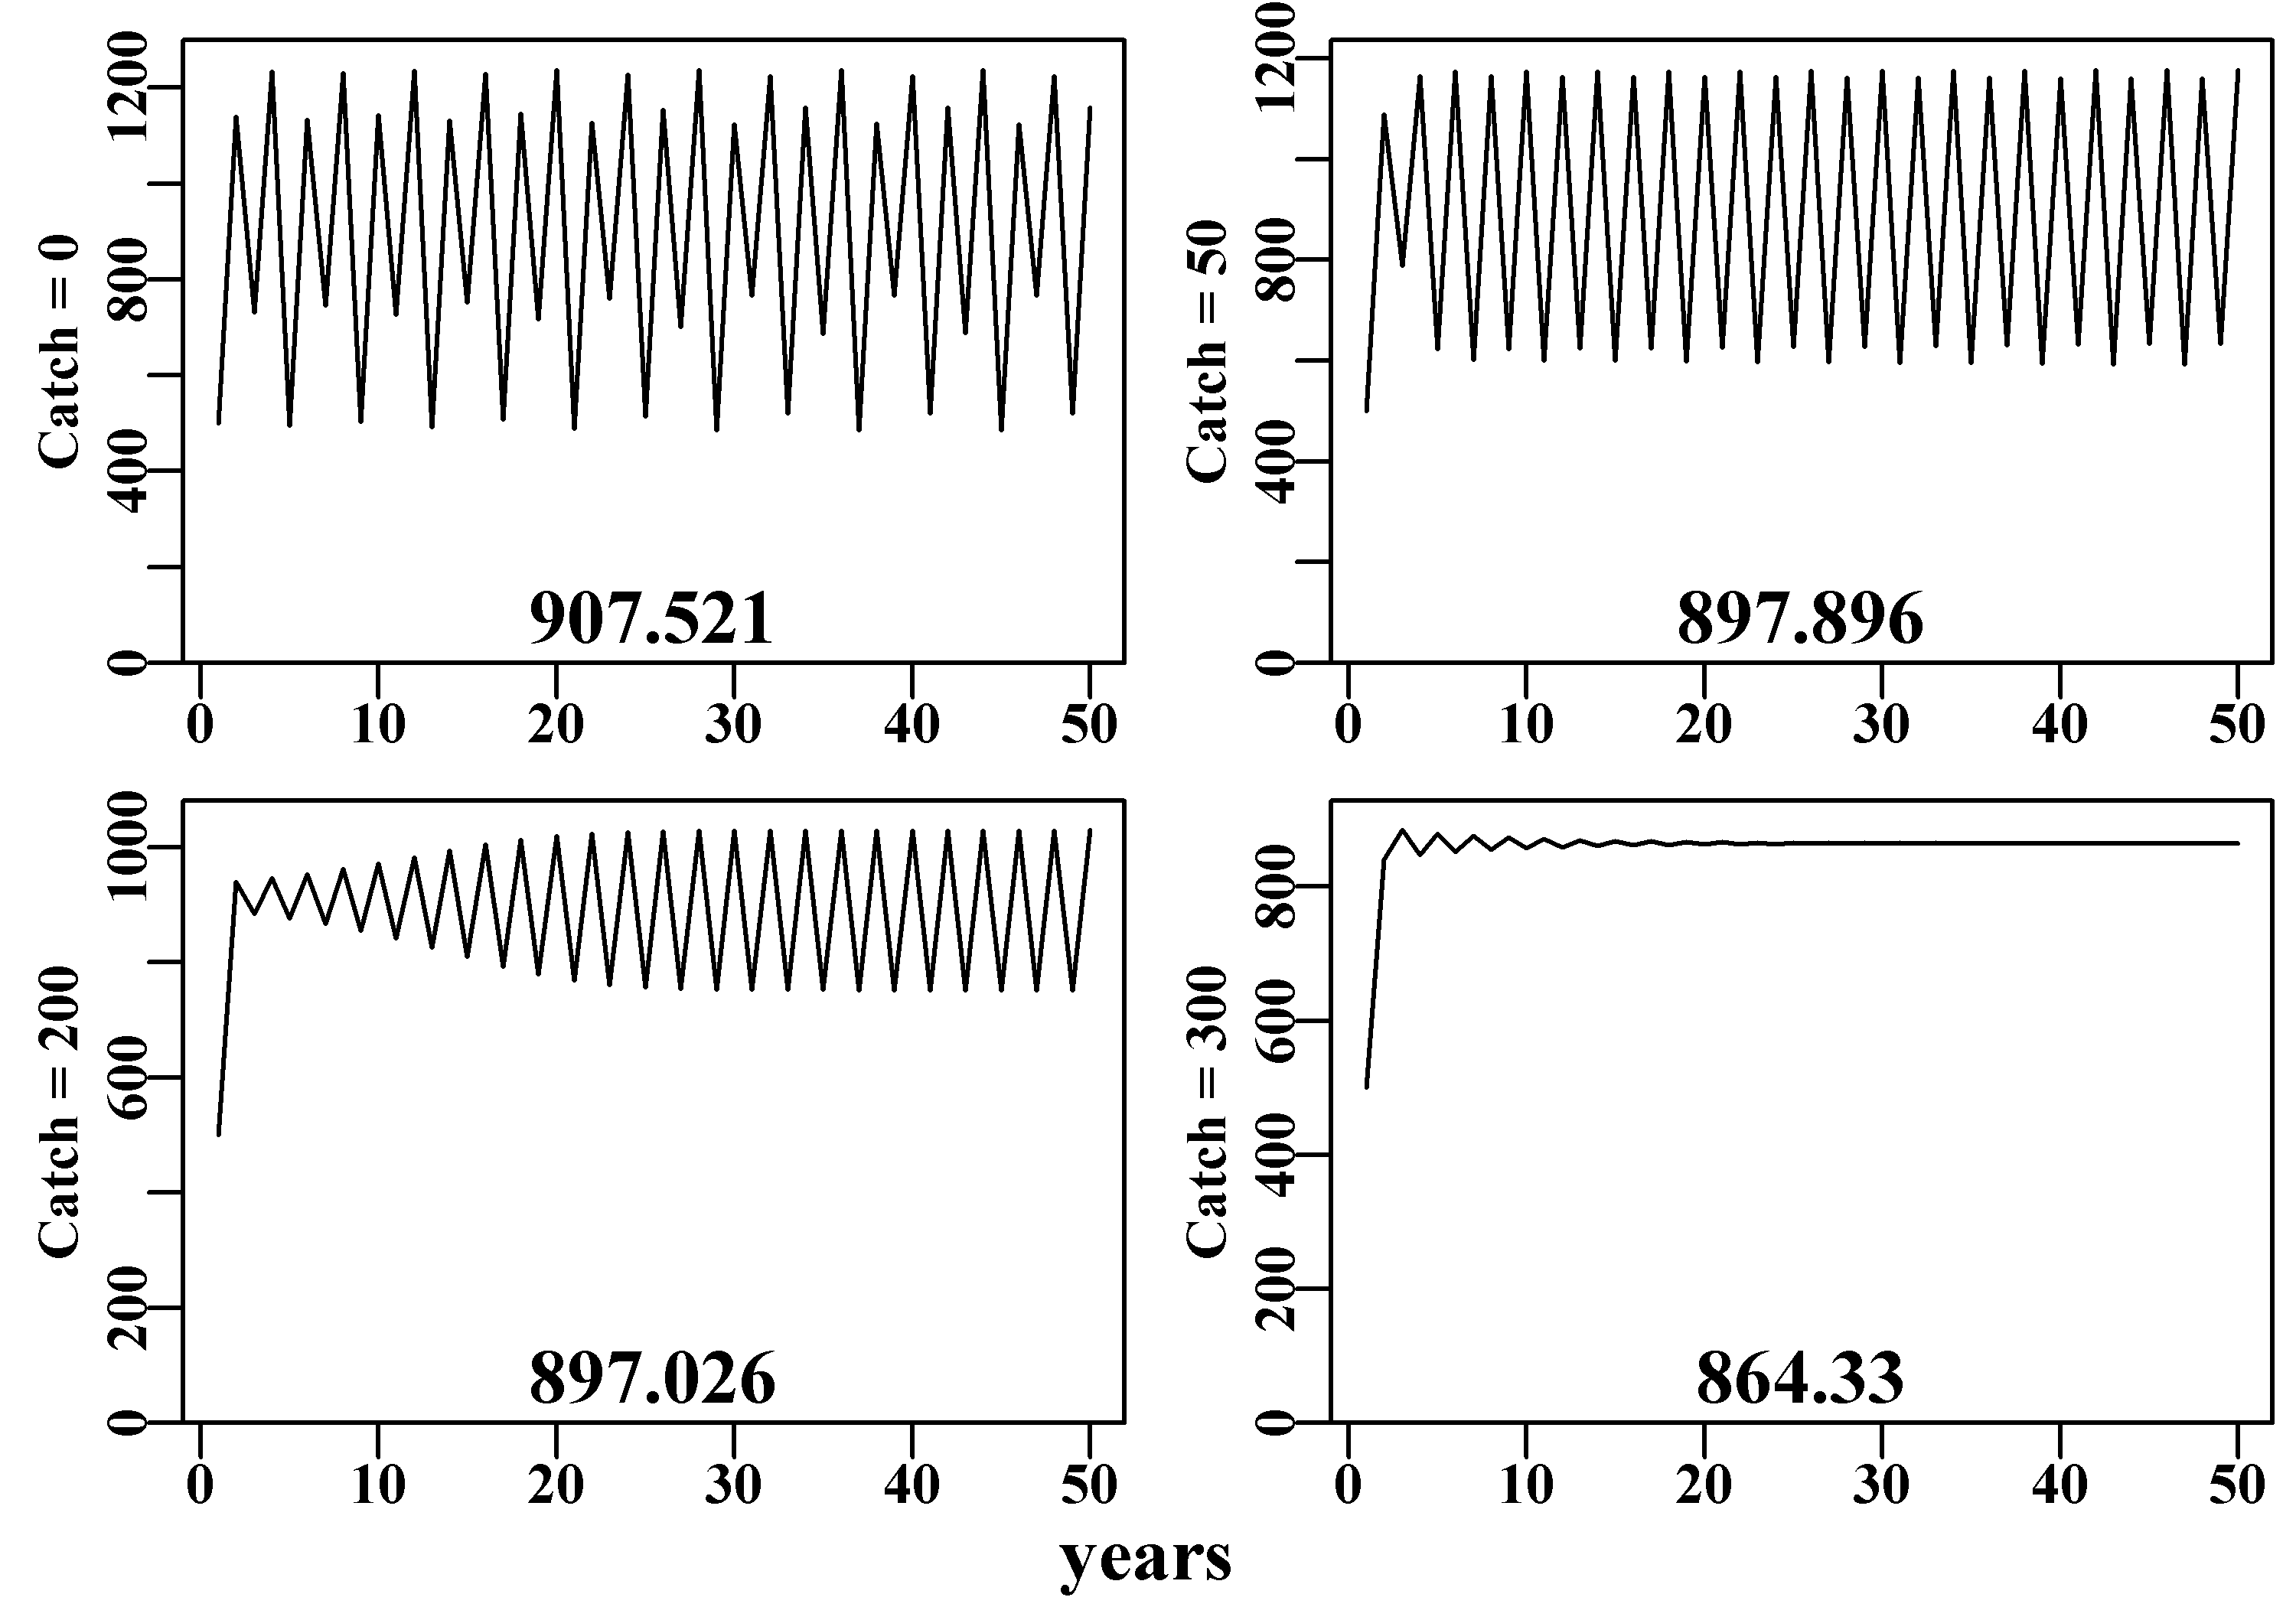 Schaefer model dynamics. The top-left plot depicts the expected unfished dynamics (8-cycle) while the next three plots, with decreasing average catches, illustrate the impact of the increased catches with no other factor changing.